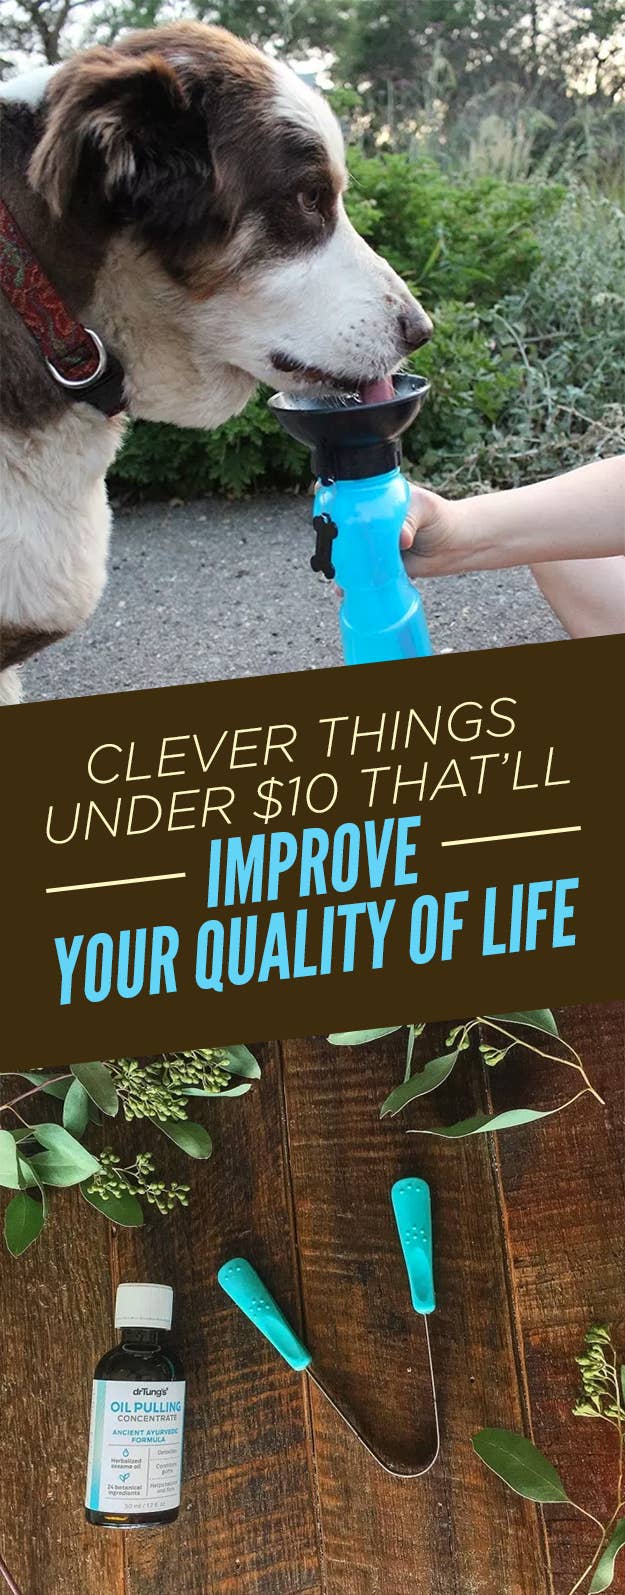 35 Cheap And Useful Things That'll Make Anyone's Life Easier